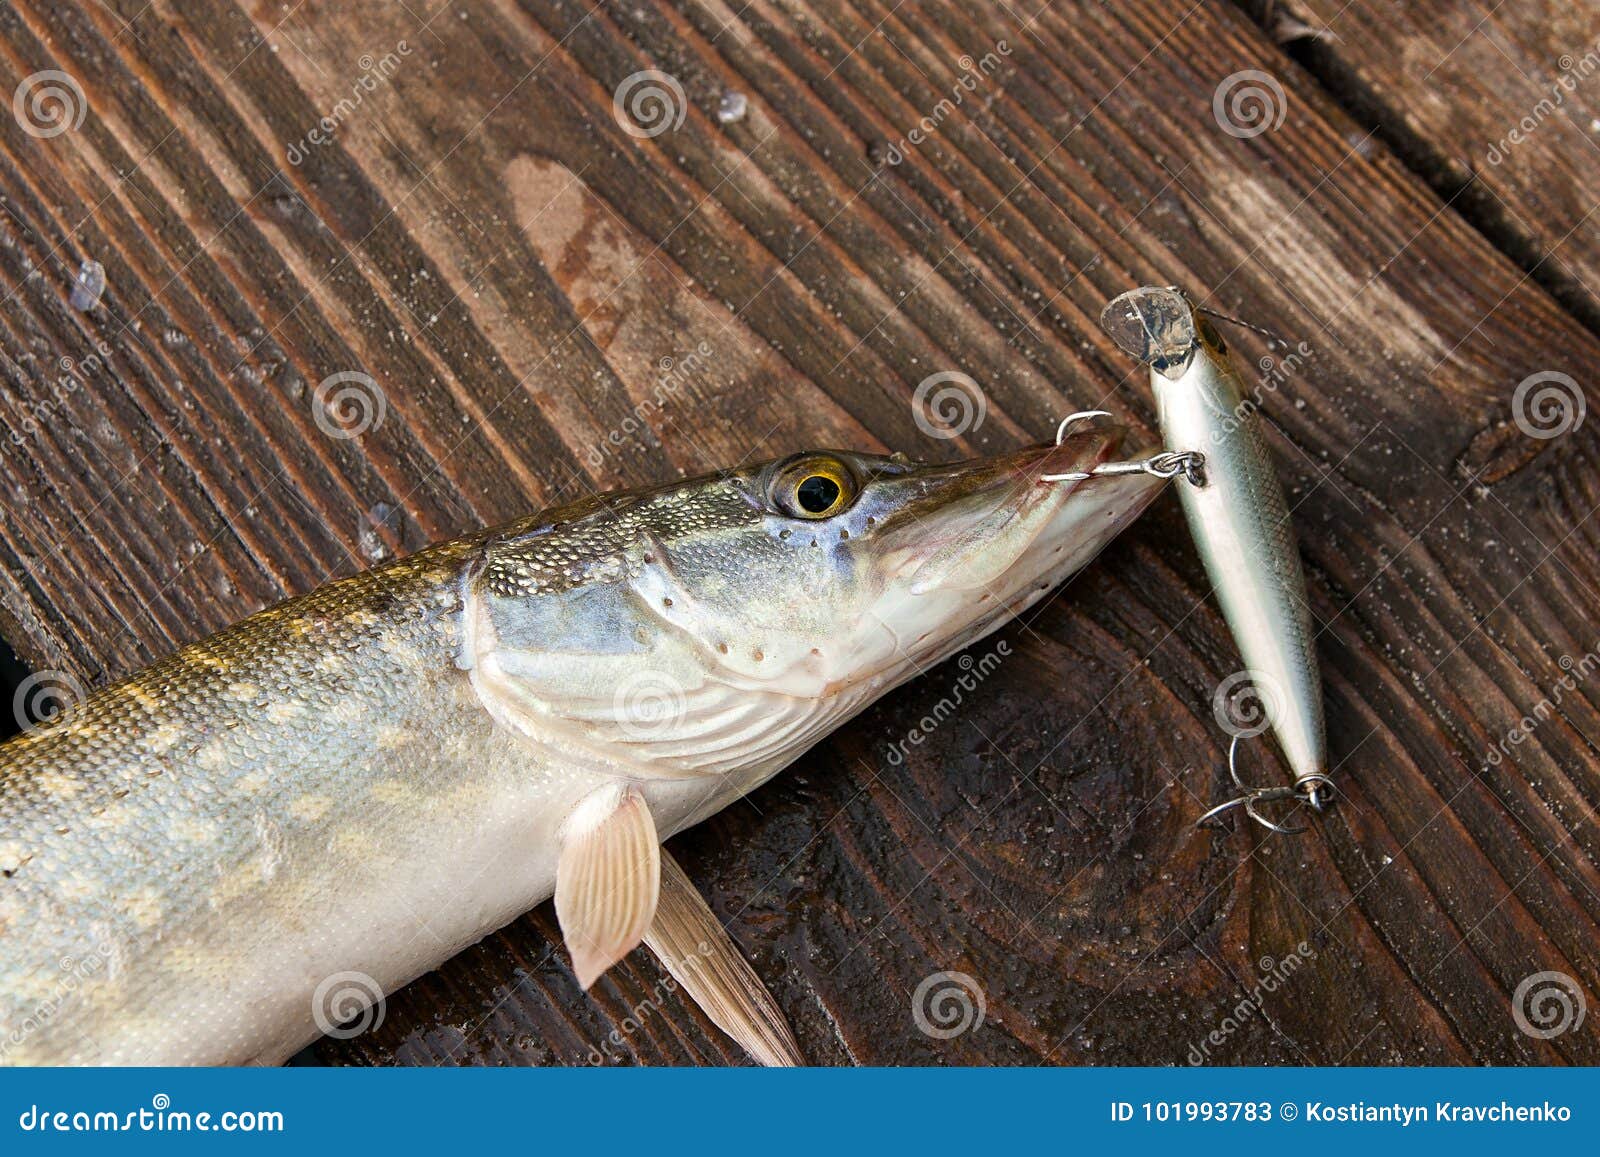 Close Up View of Big Freshwater Pike with Fishing Lure in Mouth